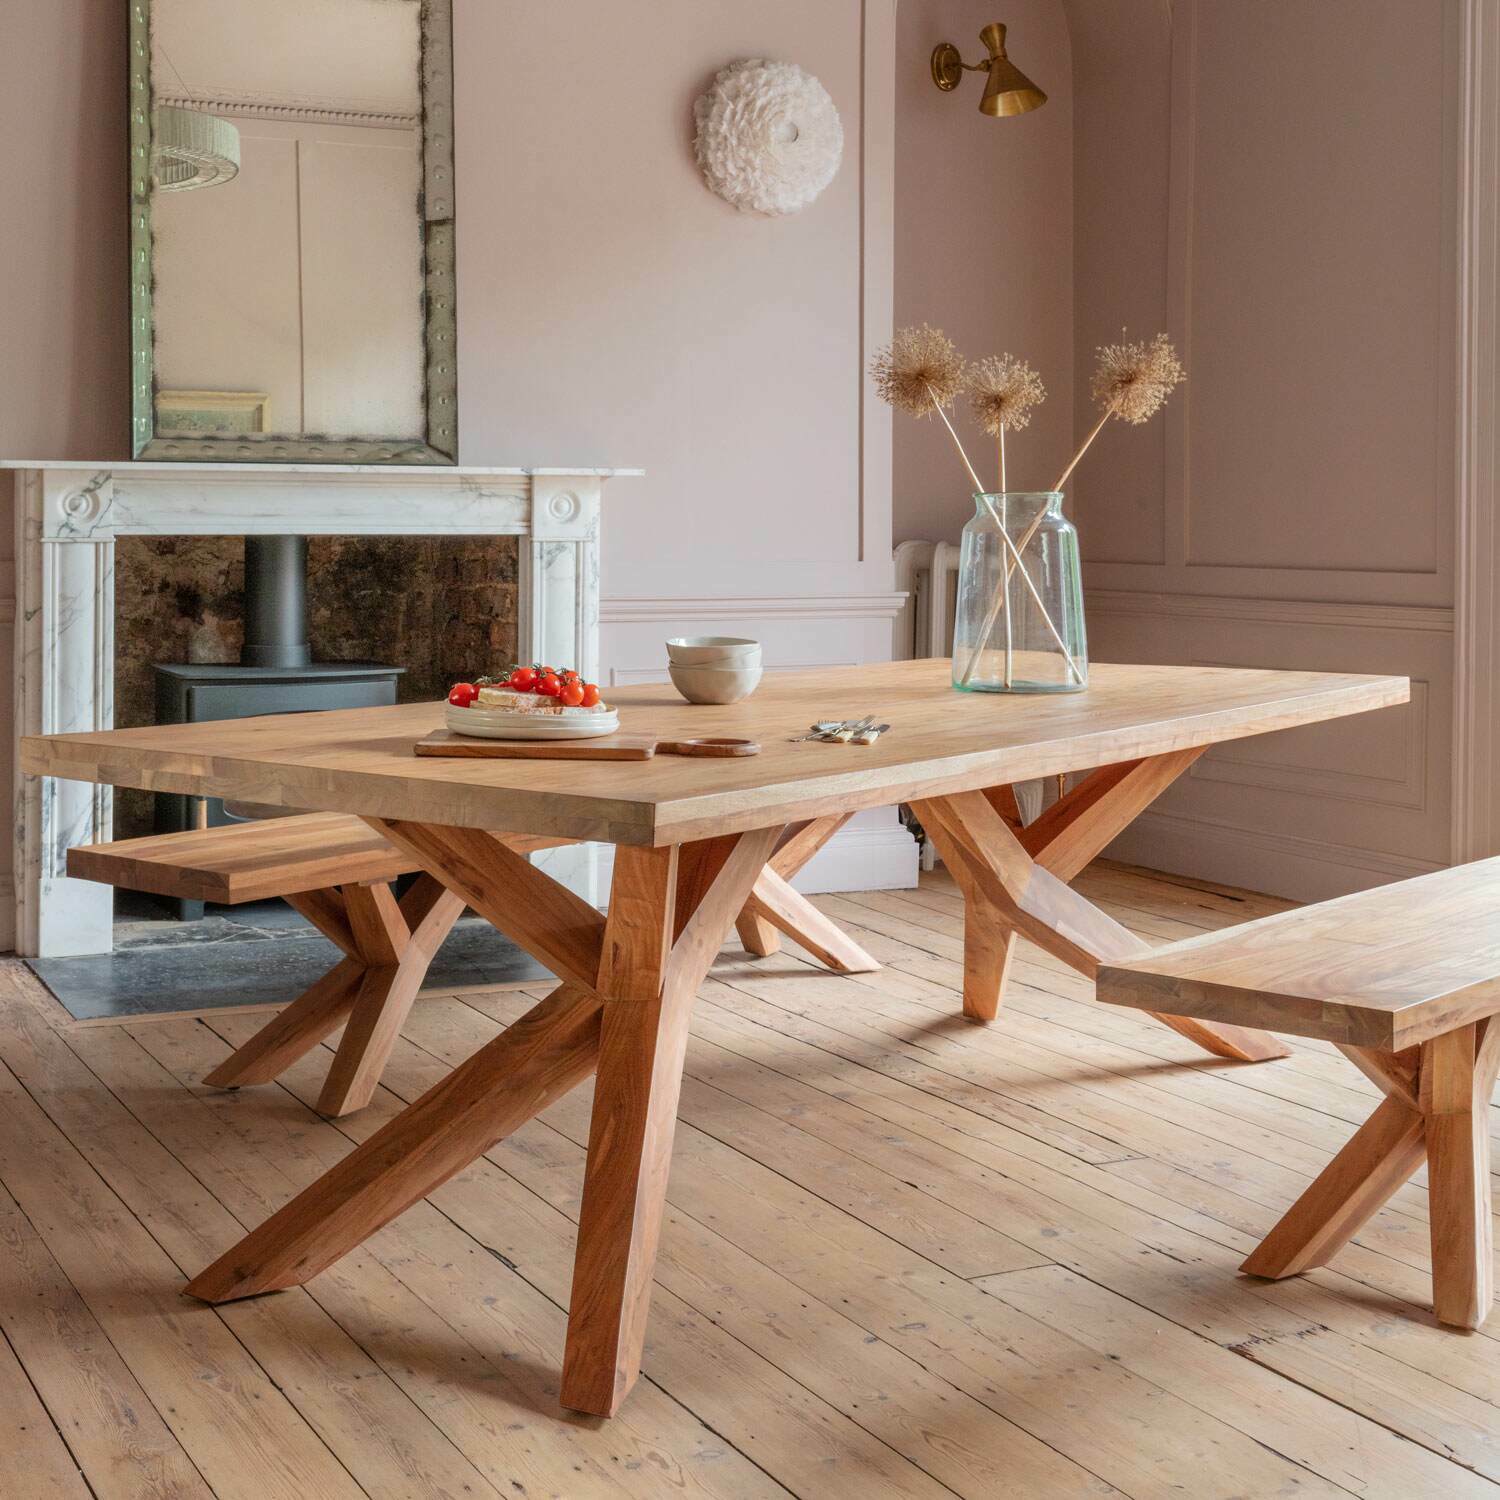 Read more about Graham and green simone eight seater dining table